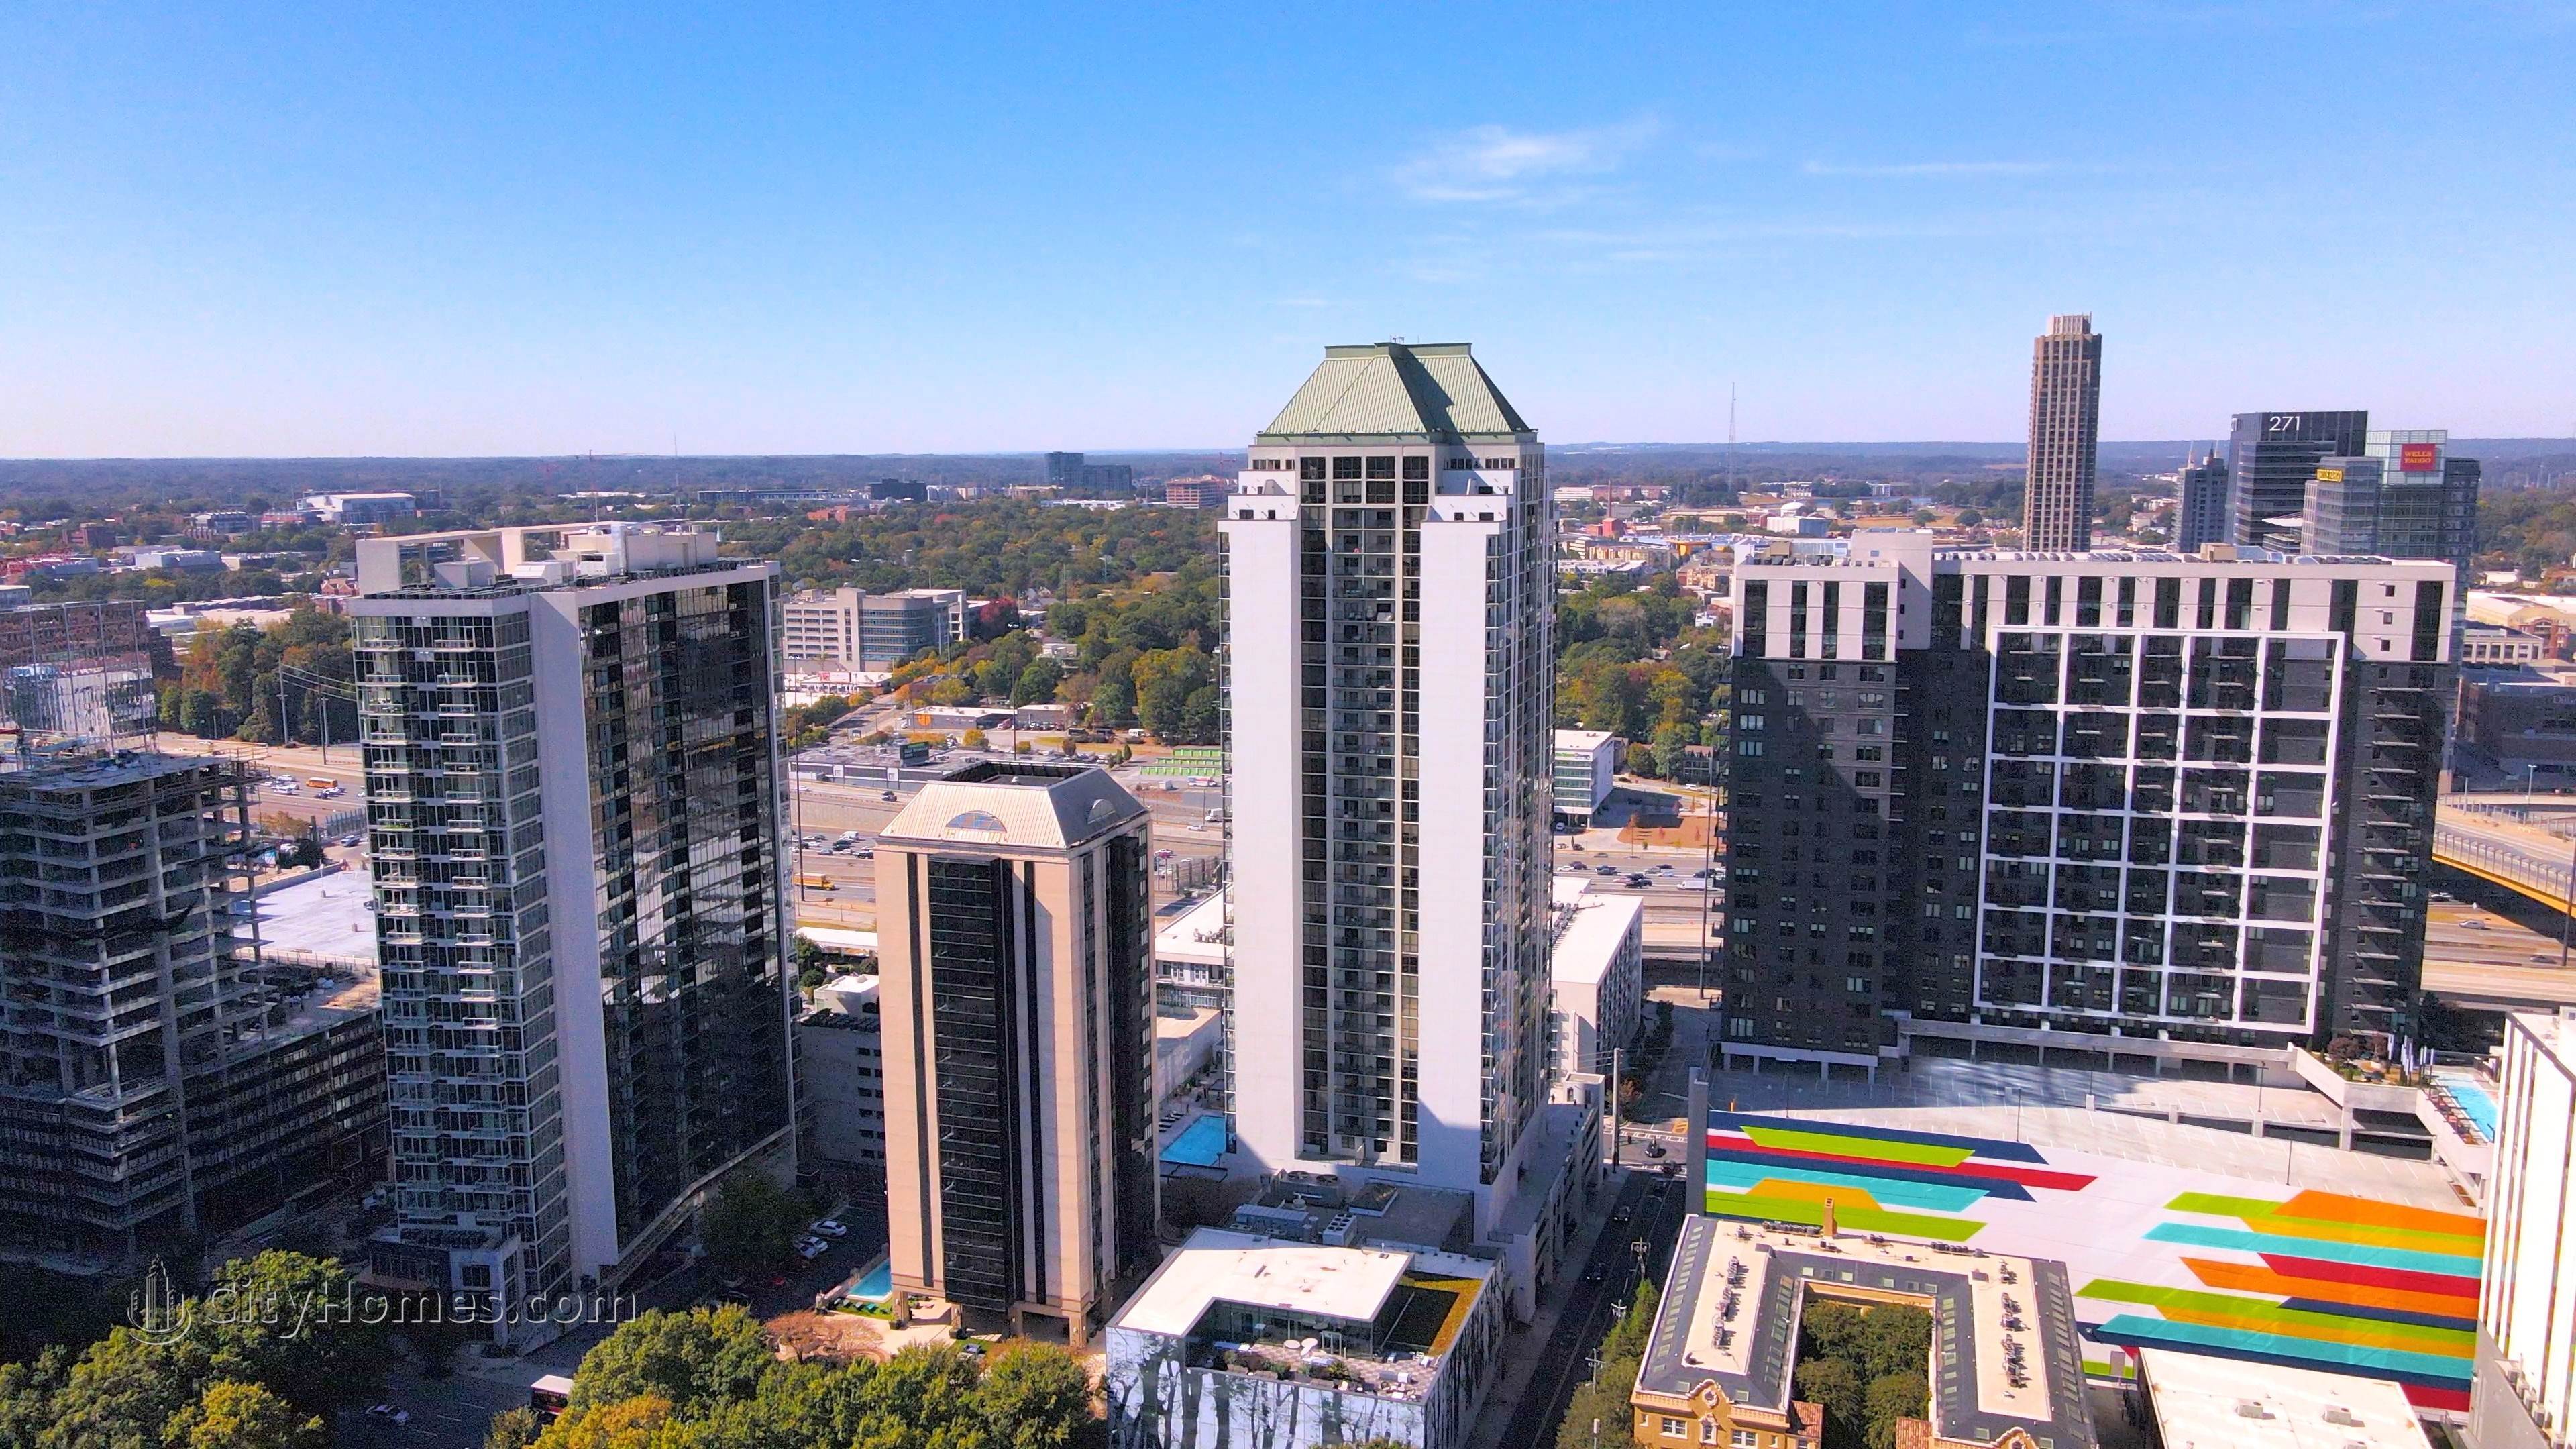 6. 1280 West Condos bâtiment à 1280 West Peachtree St NW, Greater Midtown, Atlanta, GA 30309